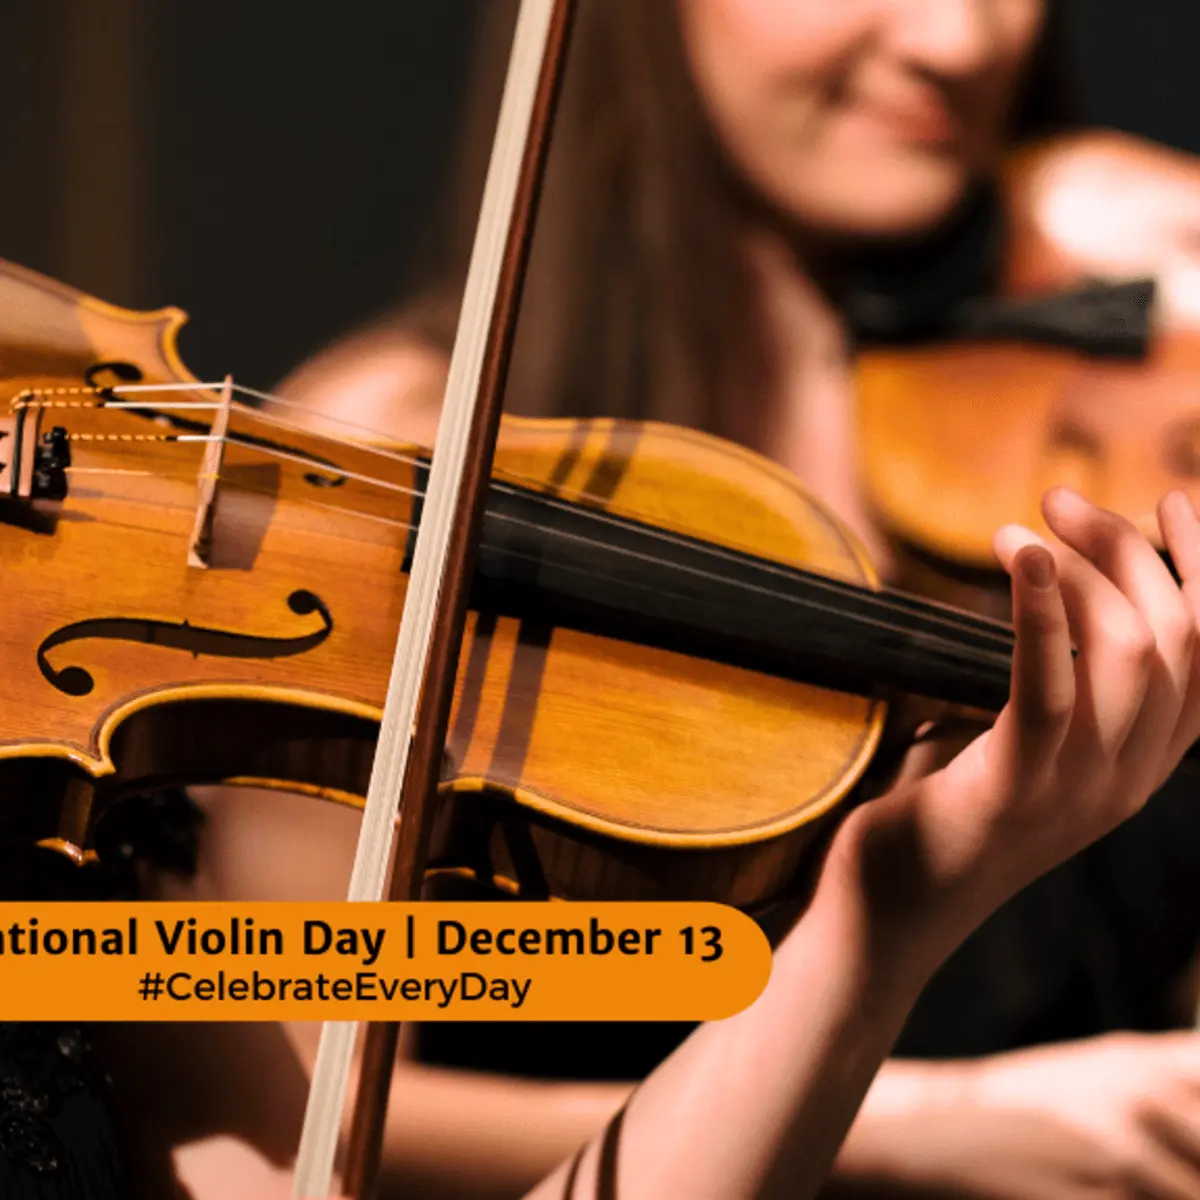 national violin day - What day is National Violin Day